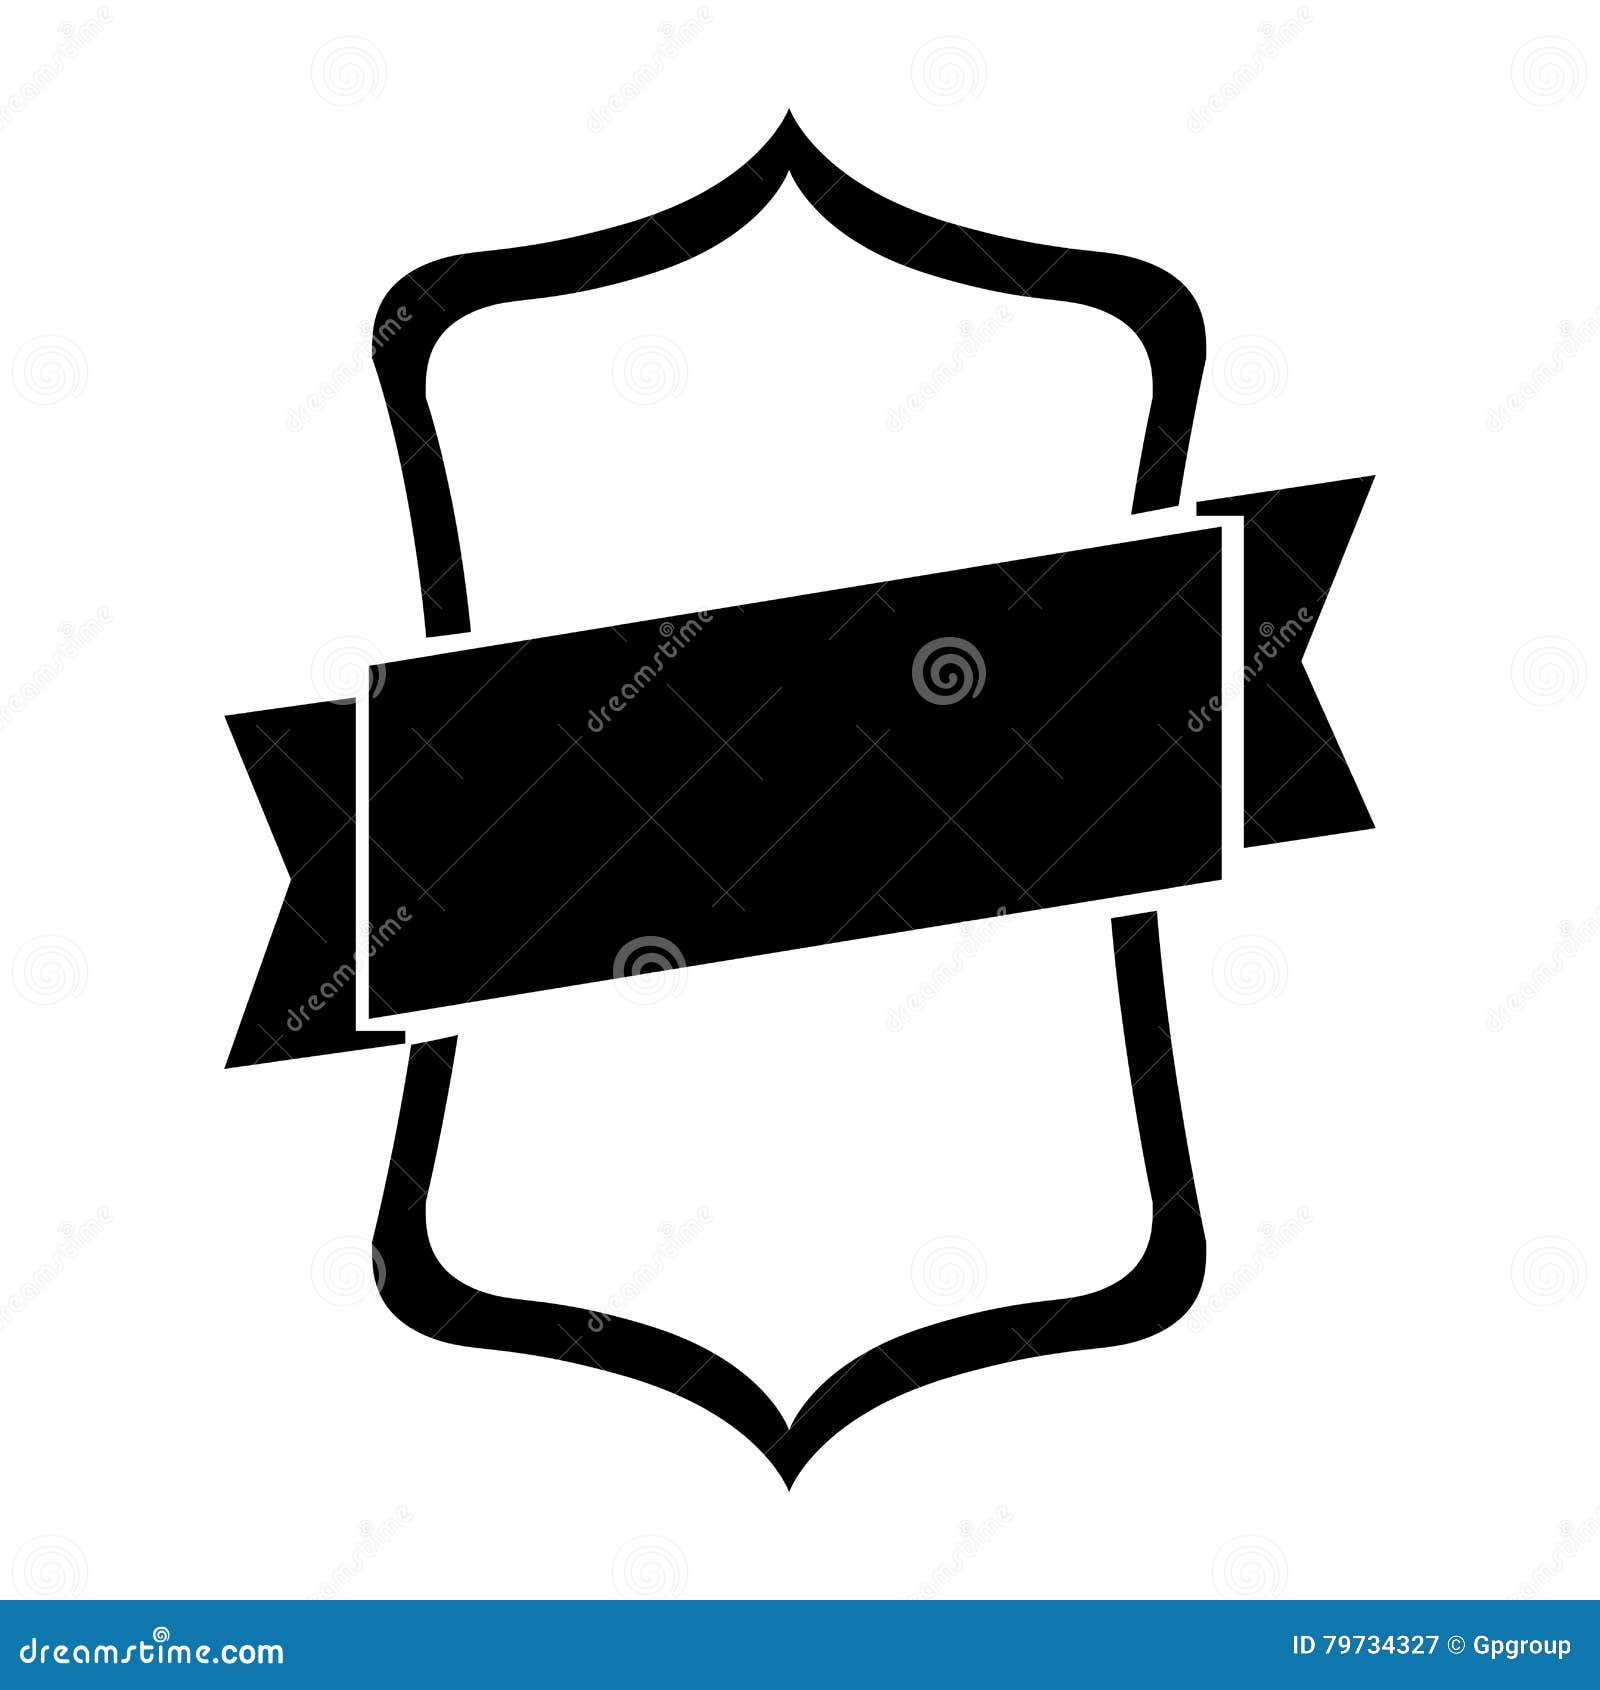 Black Silhouette Heraldic Coat of Arms with Label Stock Vector ...